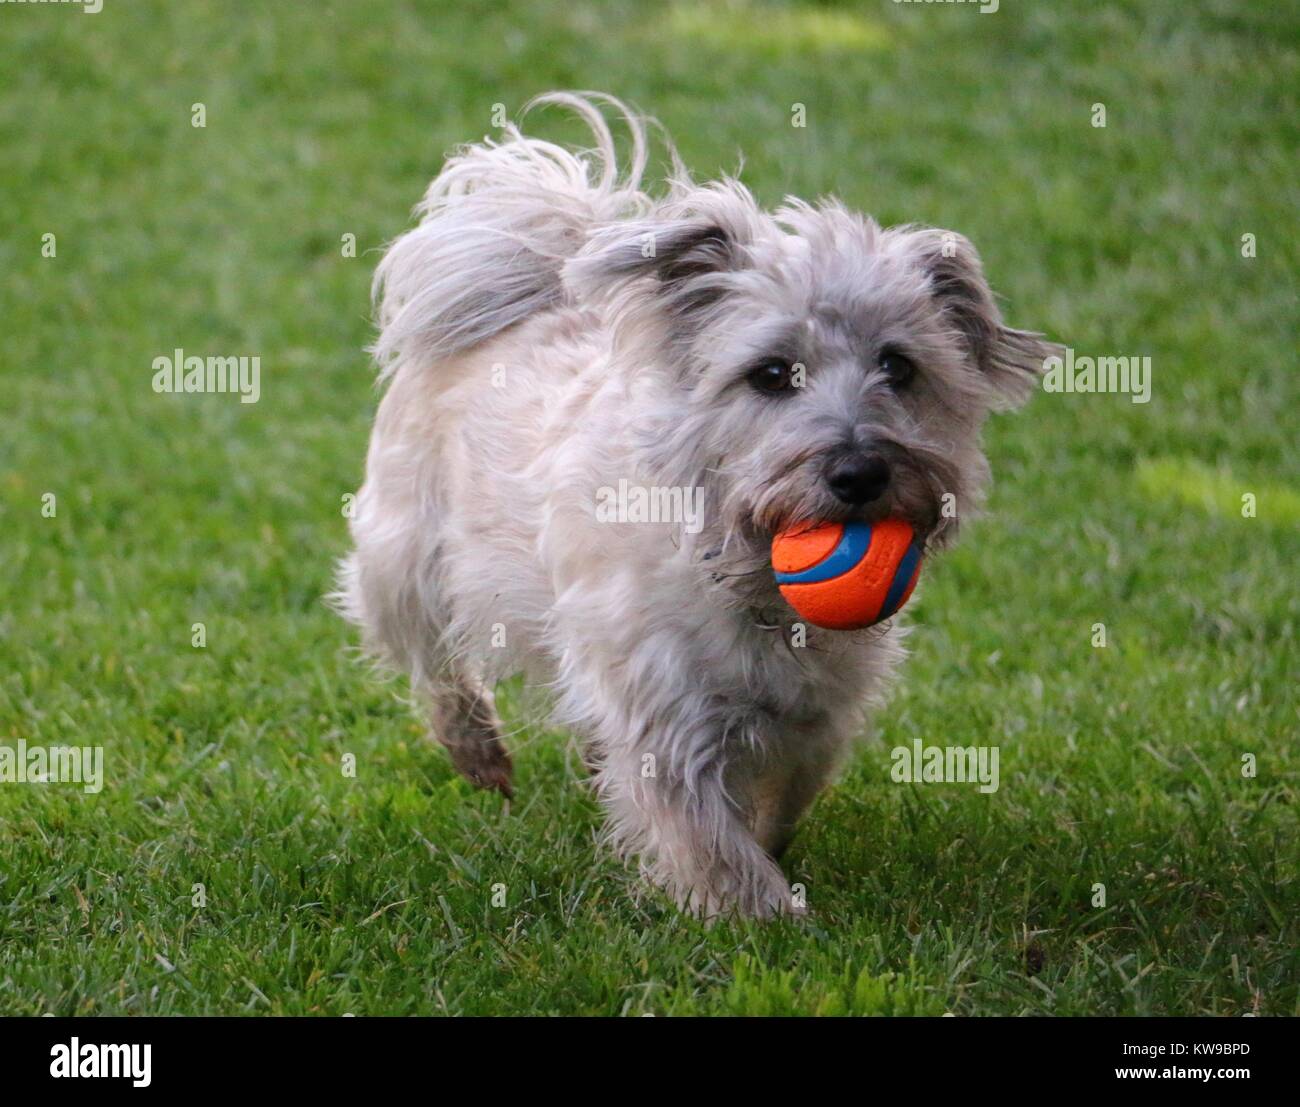 Grey terrier dog running with ball in mouth Stock Photo